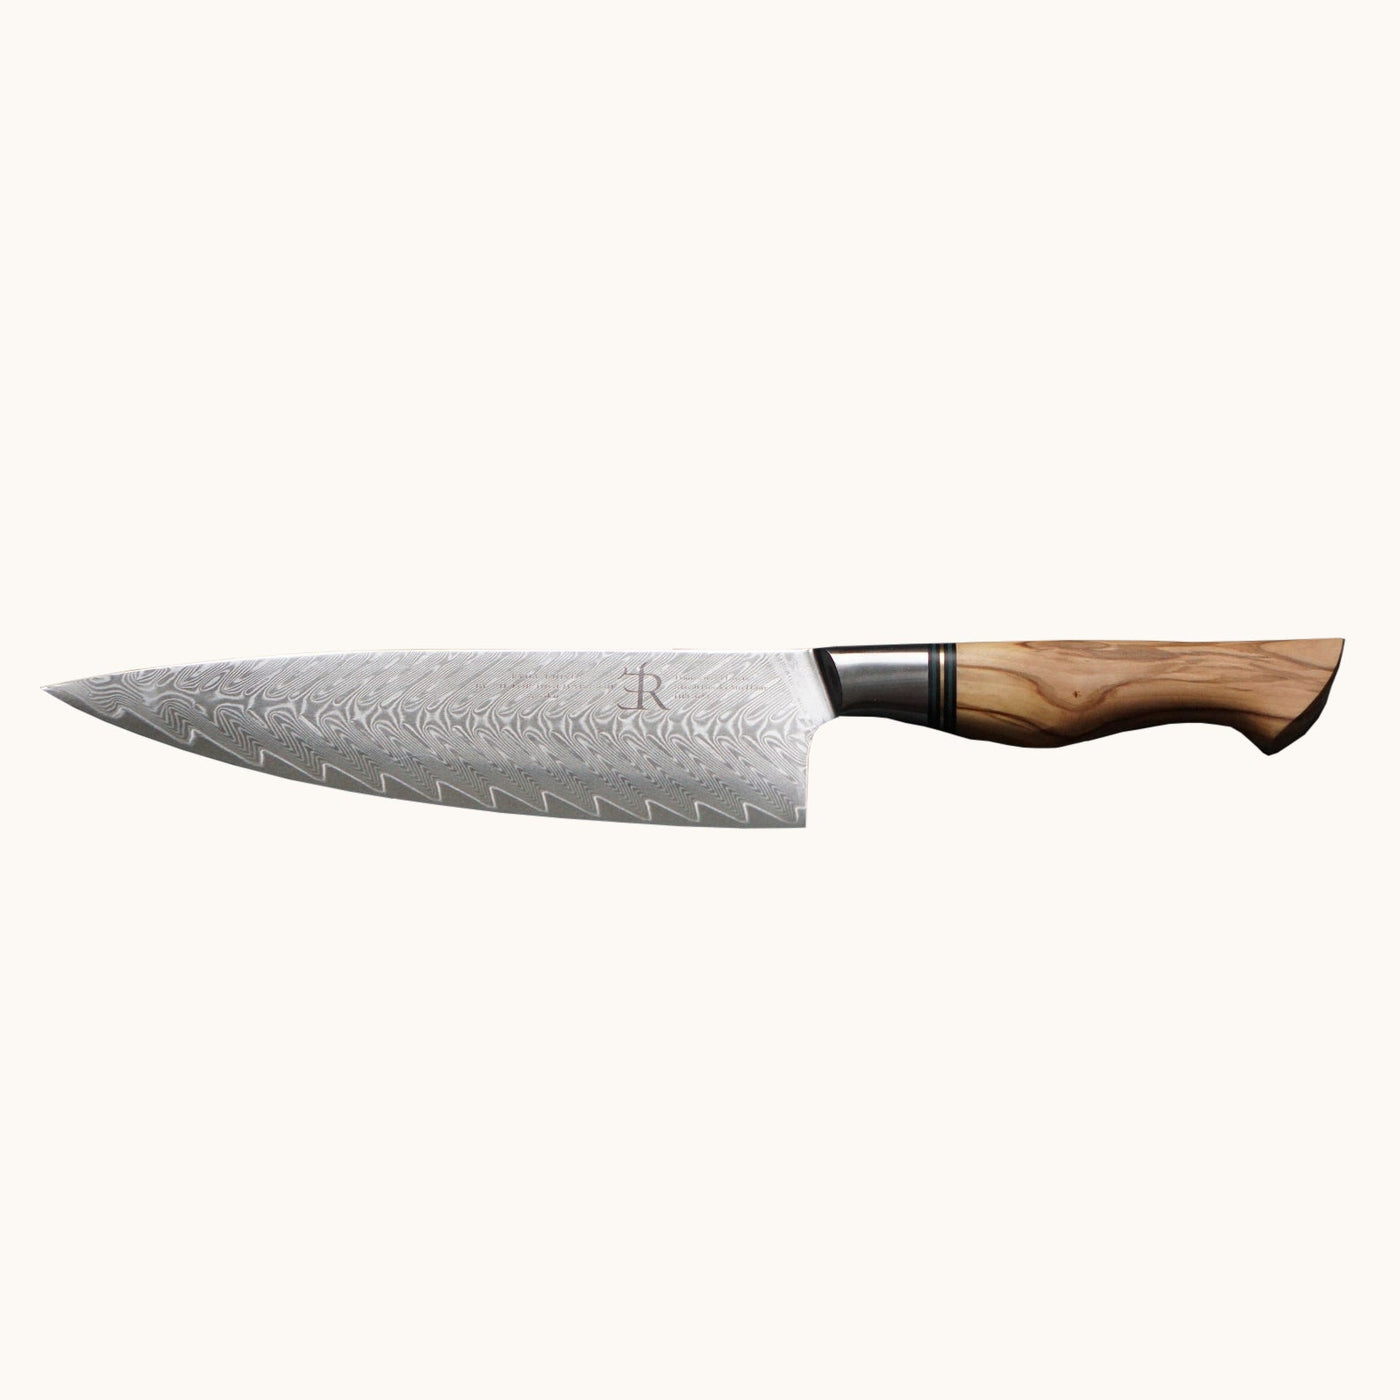 NEW! Ryda 10" Chef Knife with Olive Handle